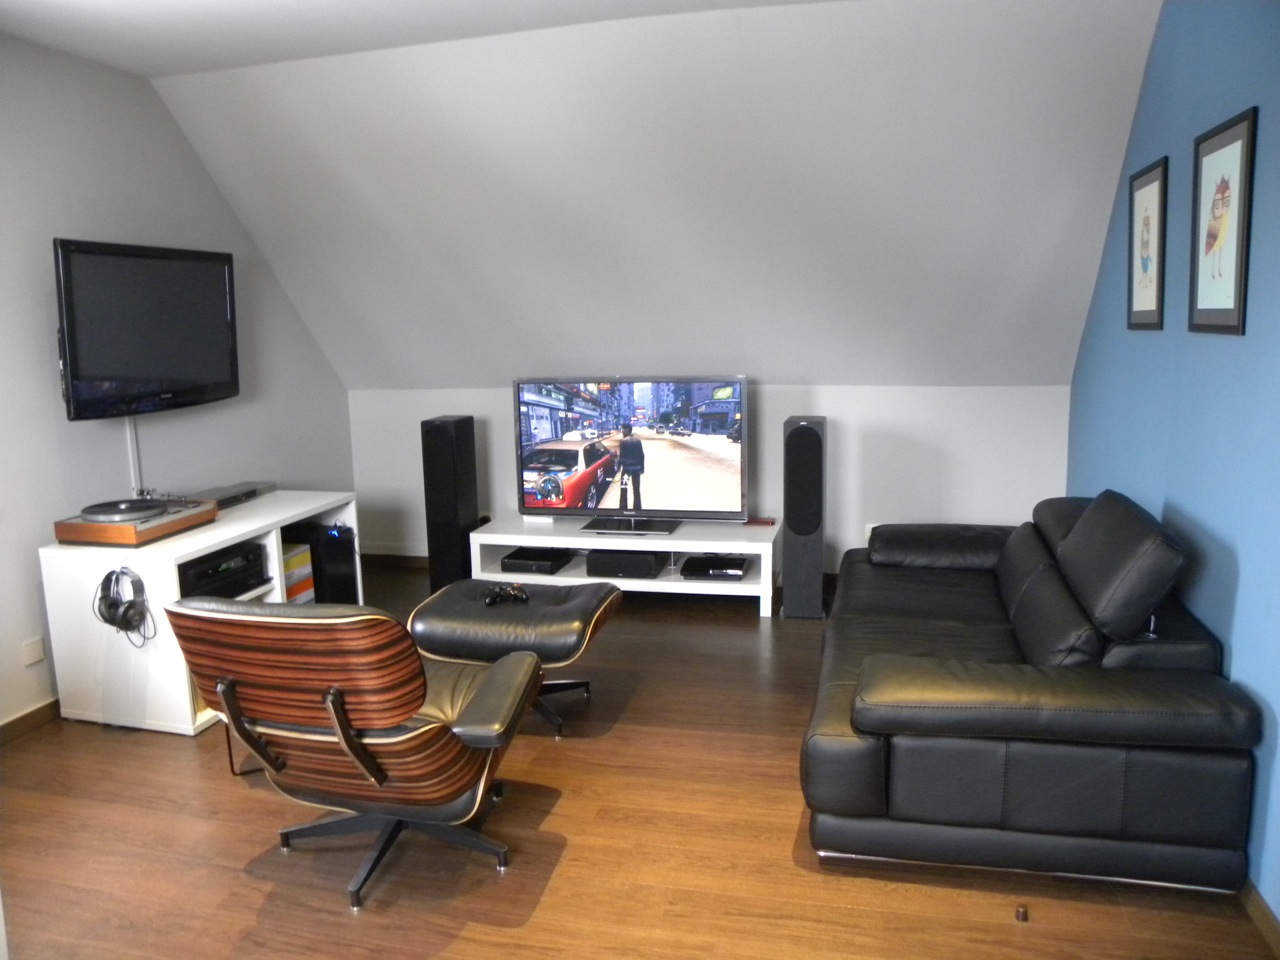 Clever Use Of Dormer Rooms - Apartment Gaming Room Ideas - HD Wallpaper 